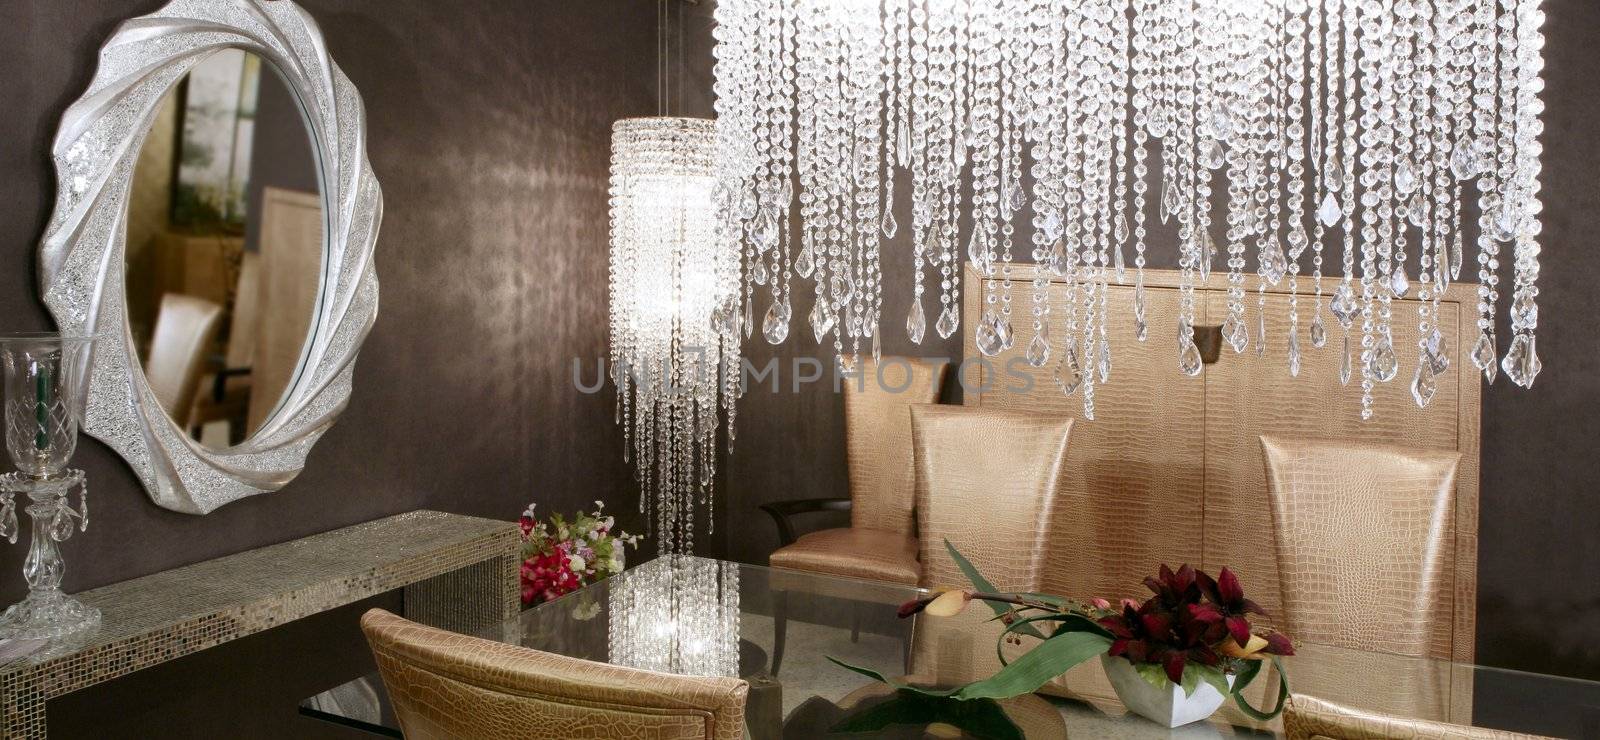 dining room modern crystal strass lamp and crocodile golden chairs